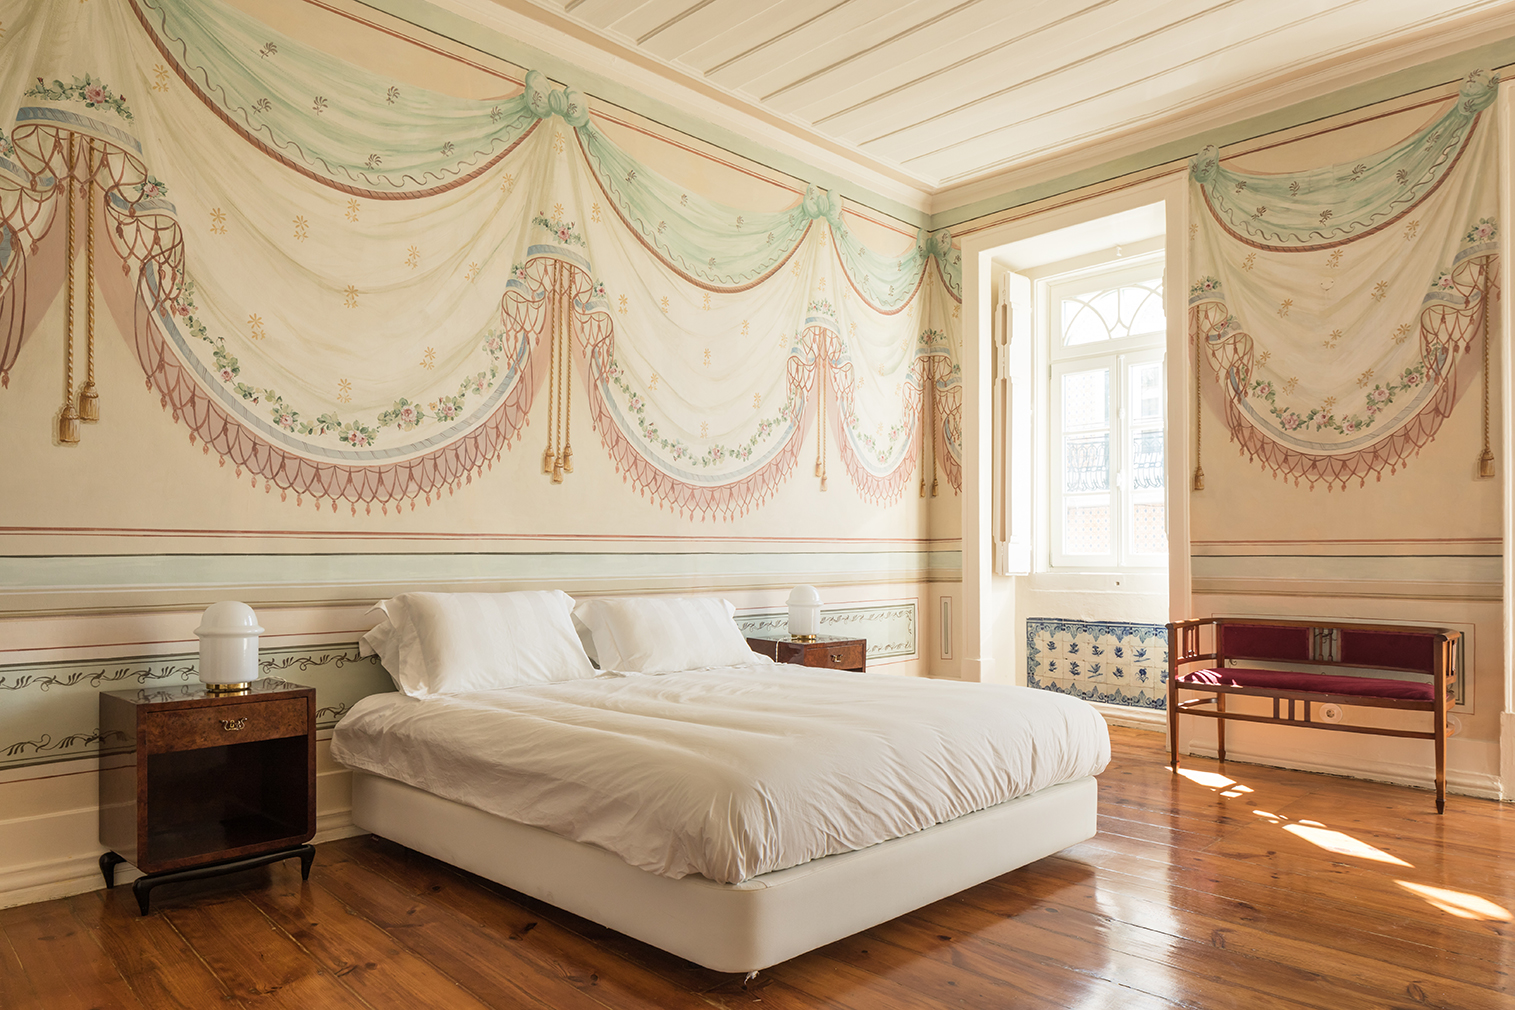 Holiday home of the week: an 18th-century Lisbon palace with a minimalist twist